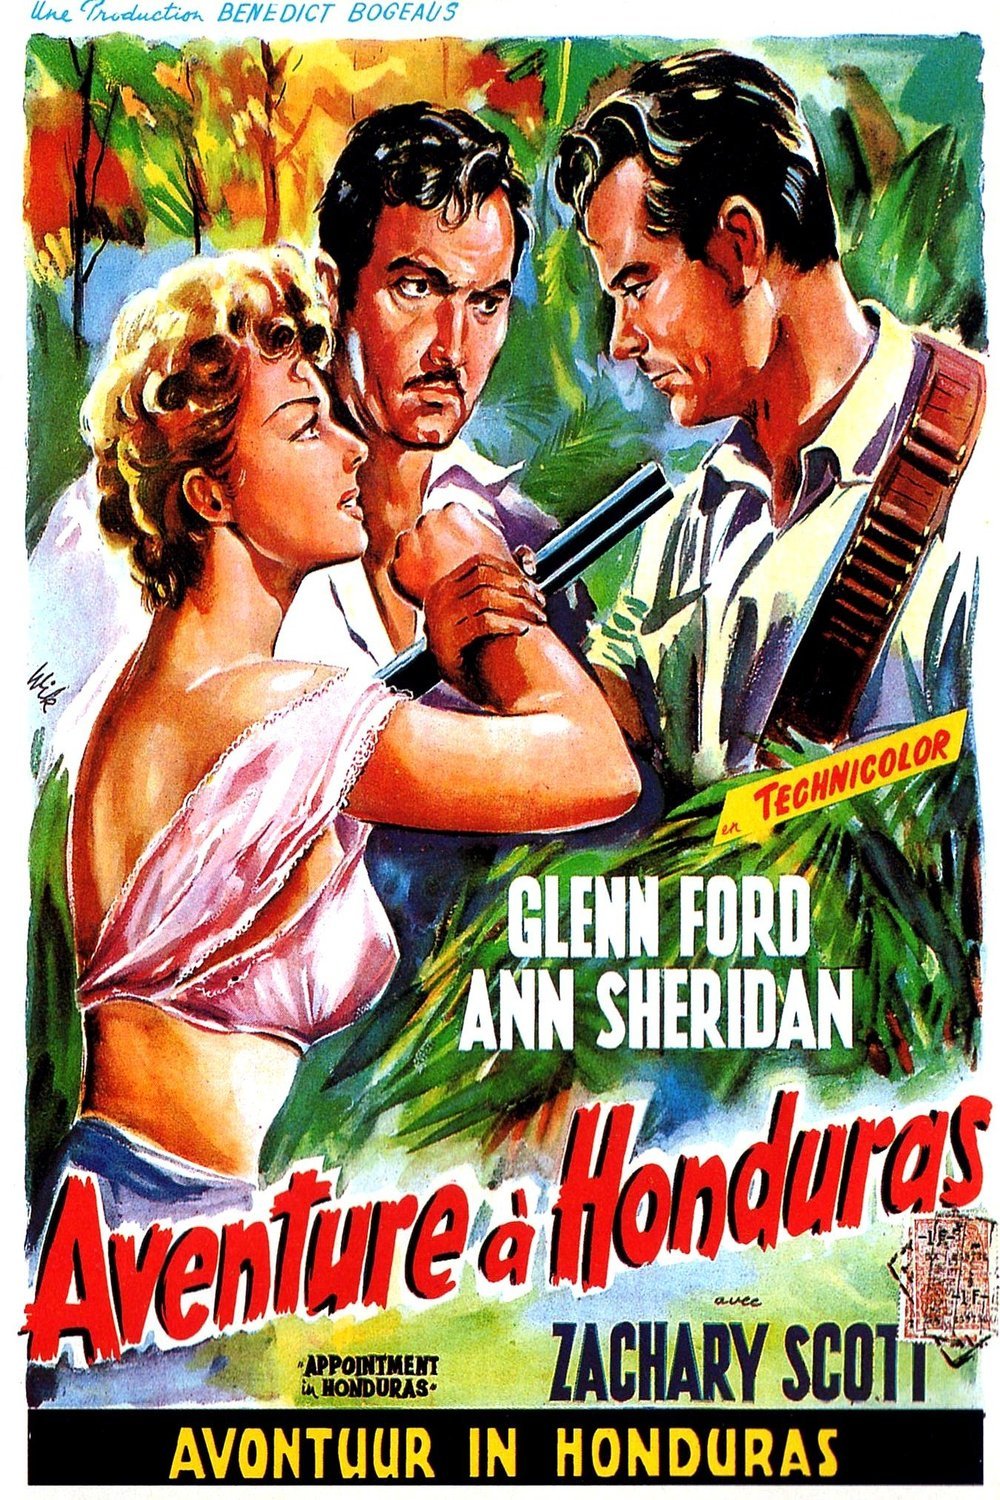 Poster of the movie Appointment in Honduras